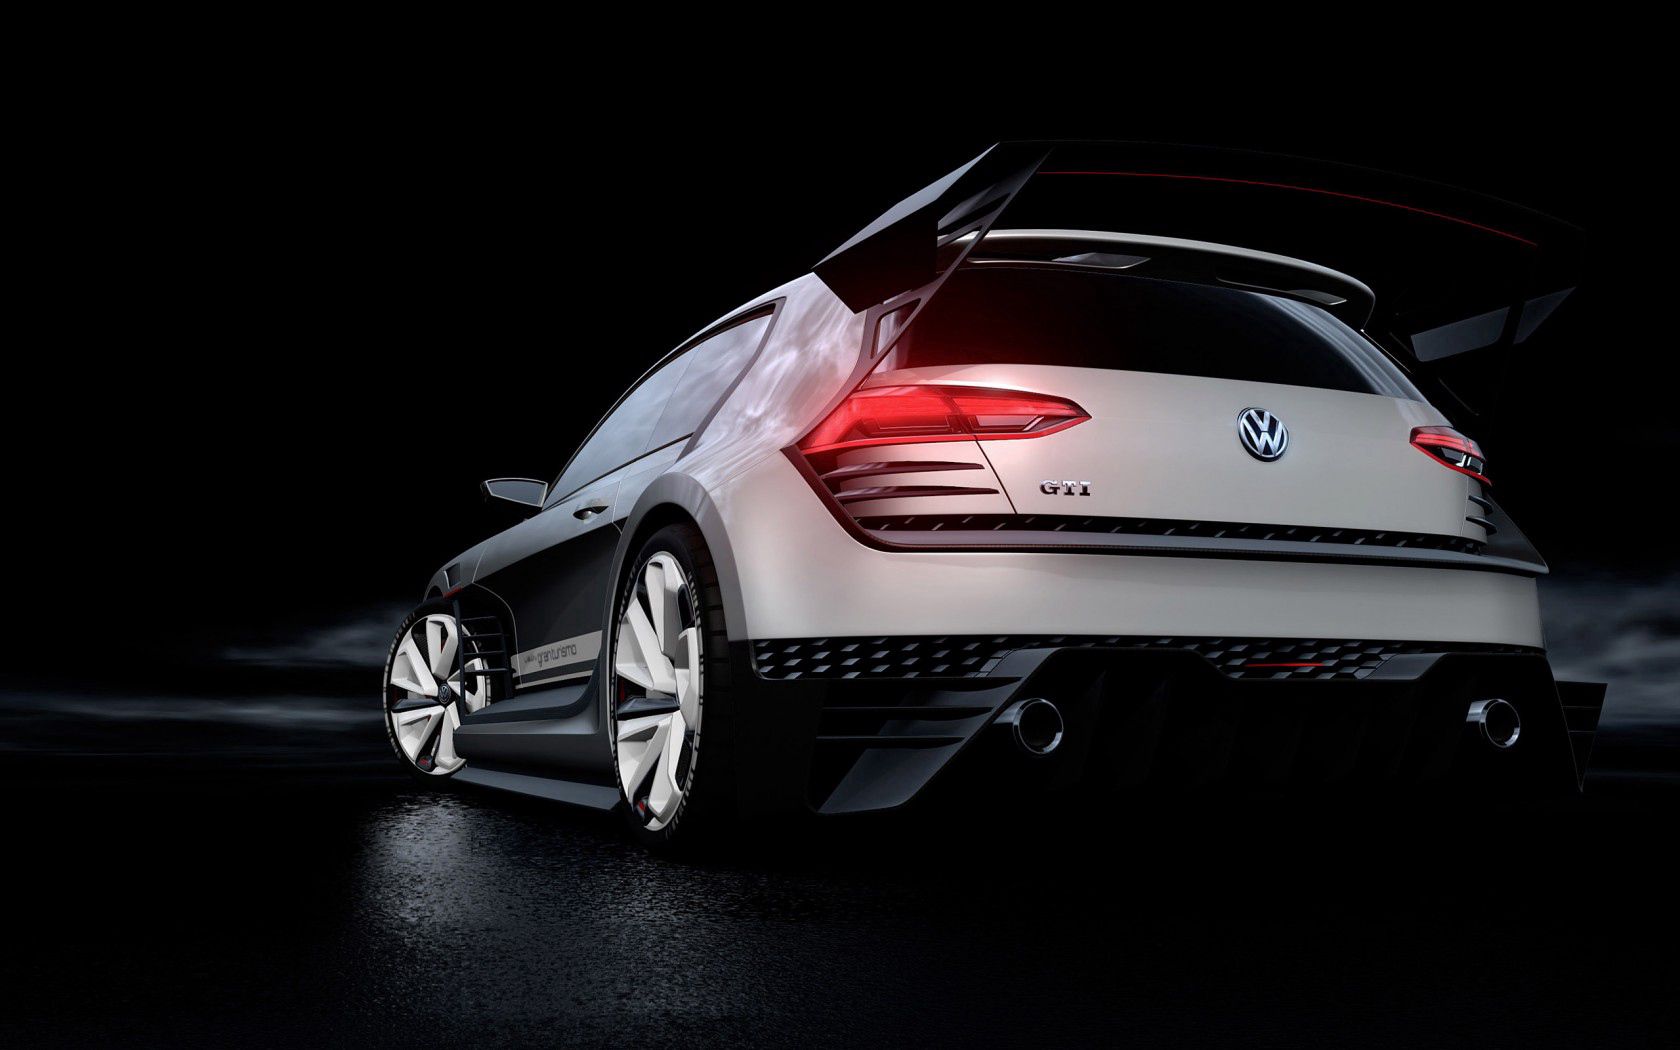 back view, volkswagen, cars, concept, rear view, style, gti